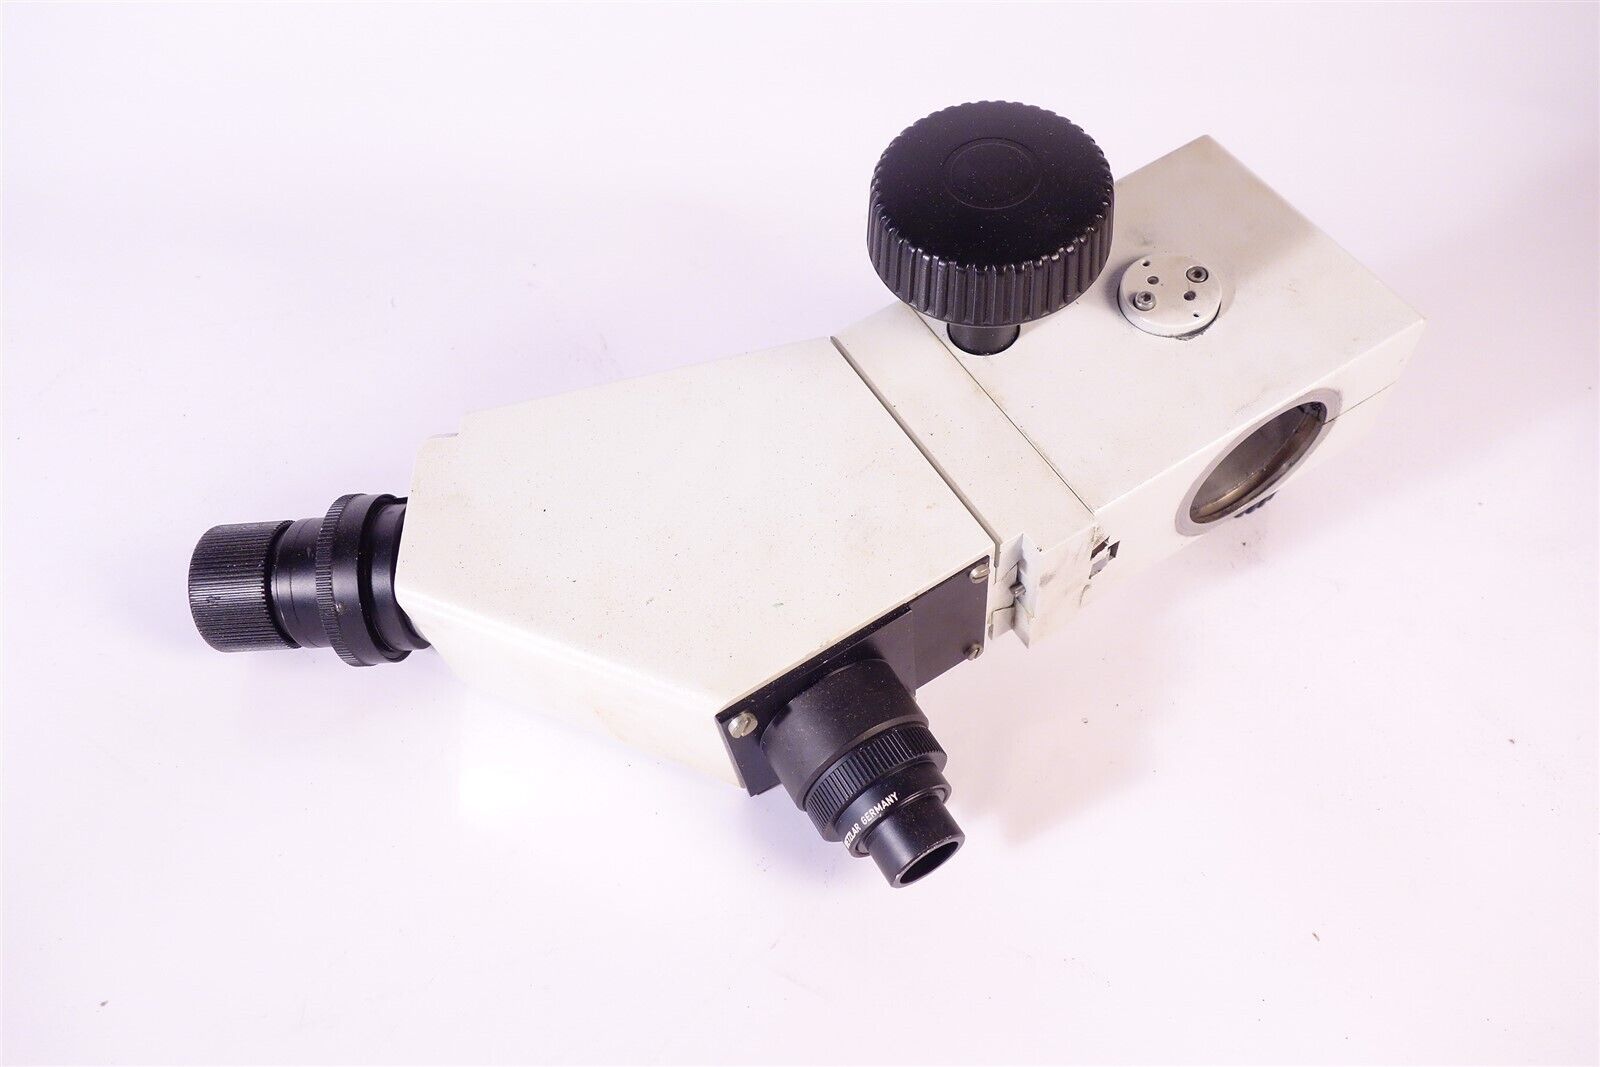 Leitz 810274 Unknown Microscope with 1:1 Lens - No Stand 